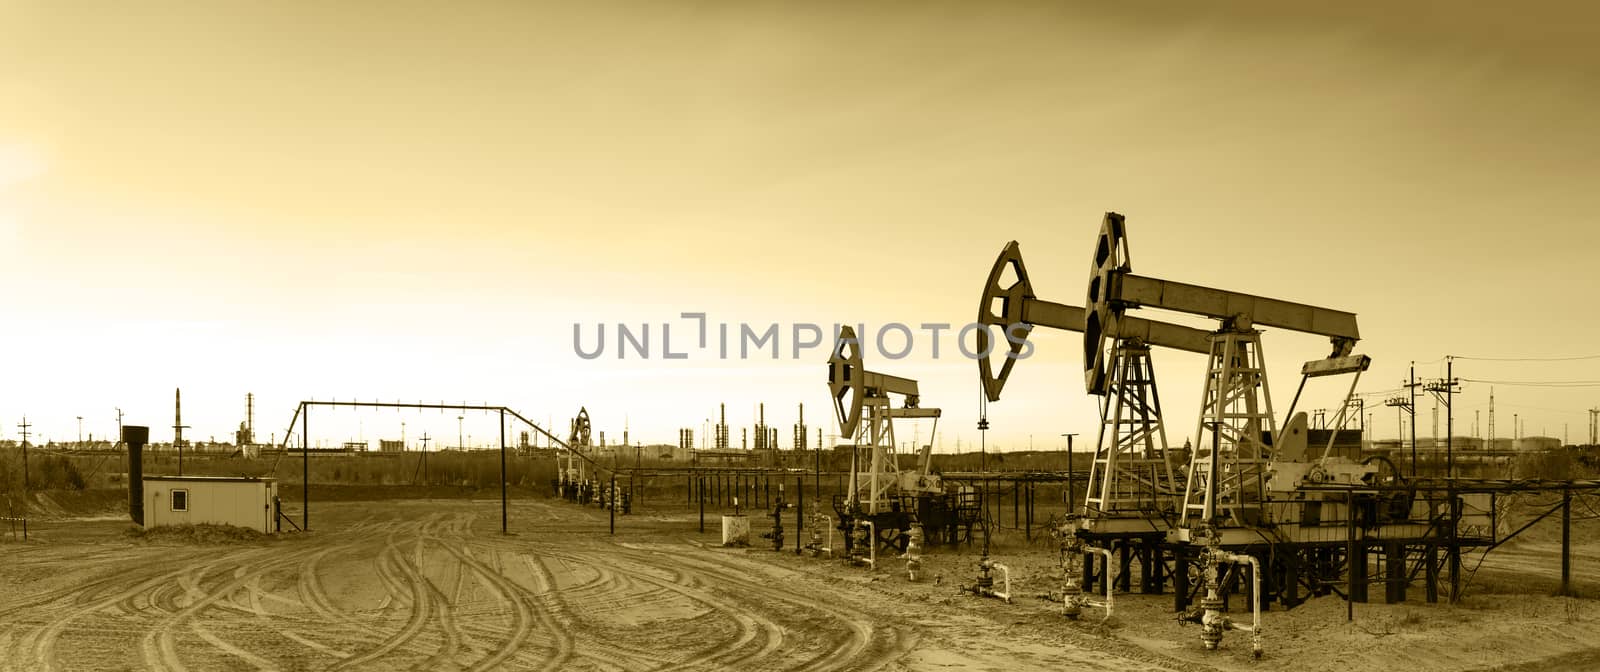 Oil and gas industry. Panoramic of a pumpjack and oil refinery. 